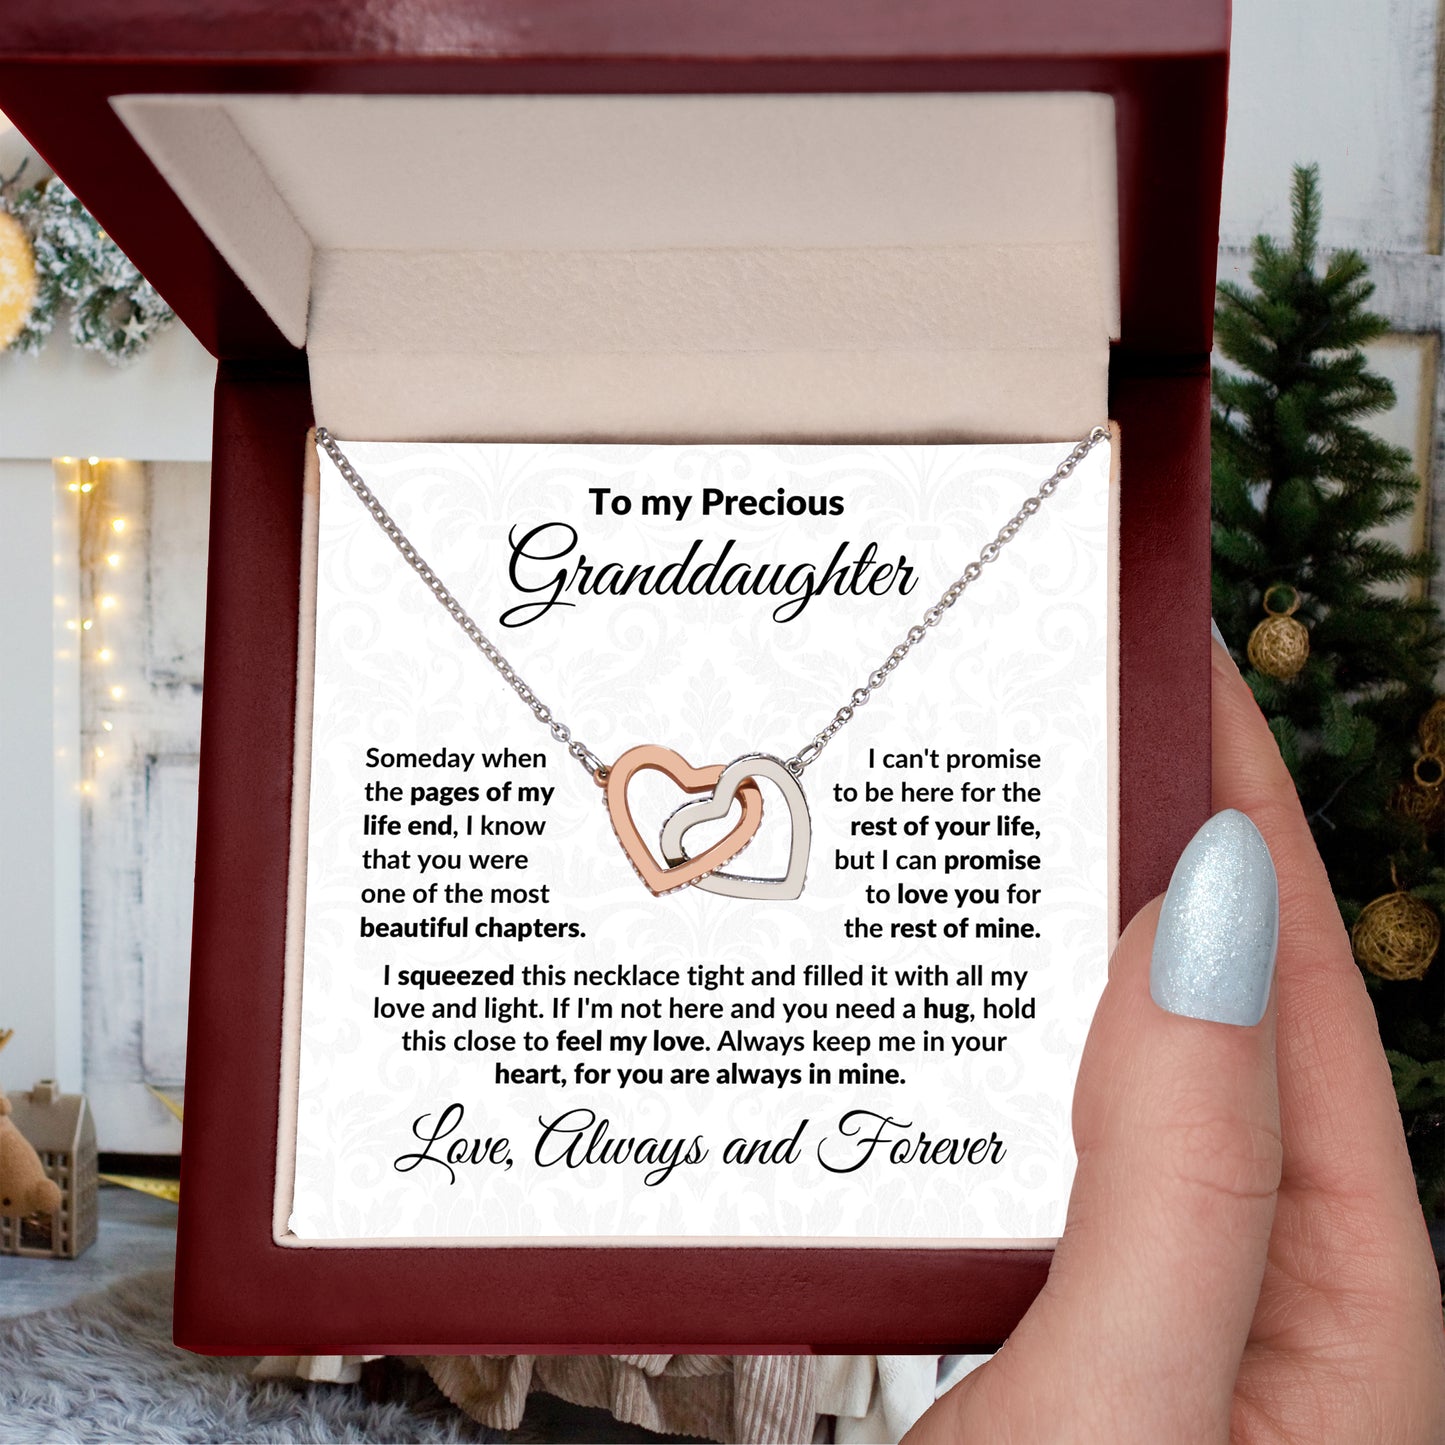 To My Precious Granddaughter Interlocking Heart Necklace with Message Card and Gift Box